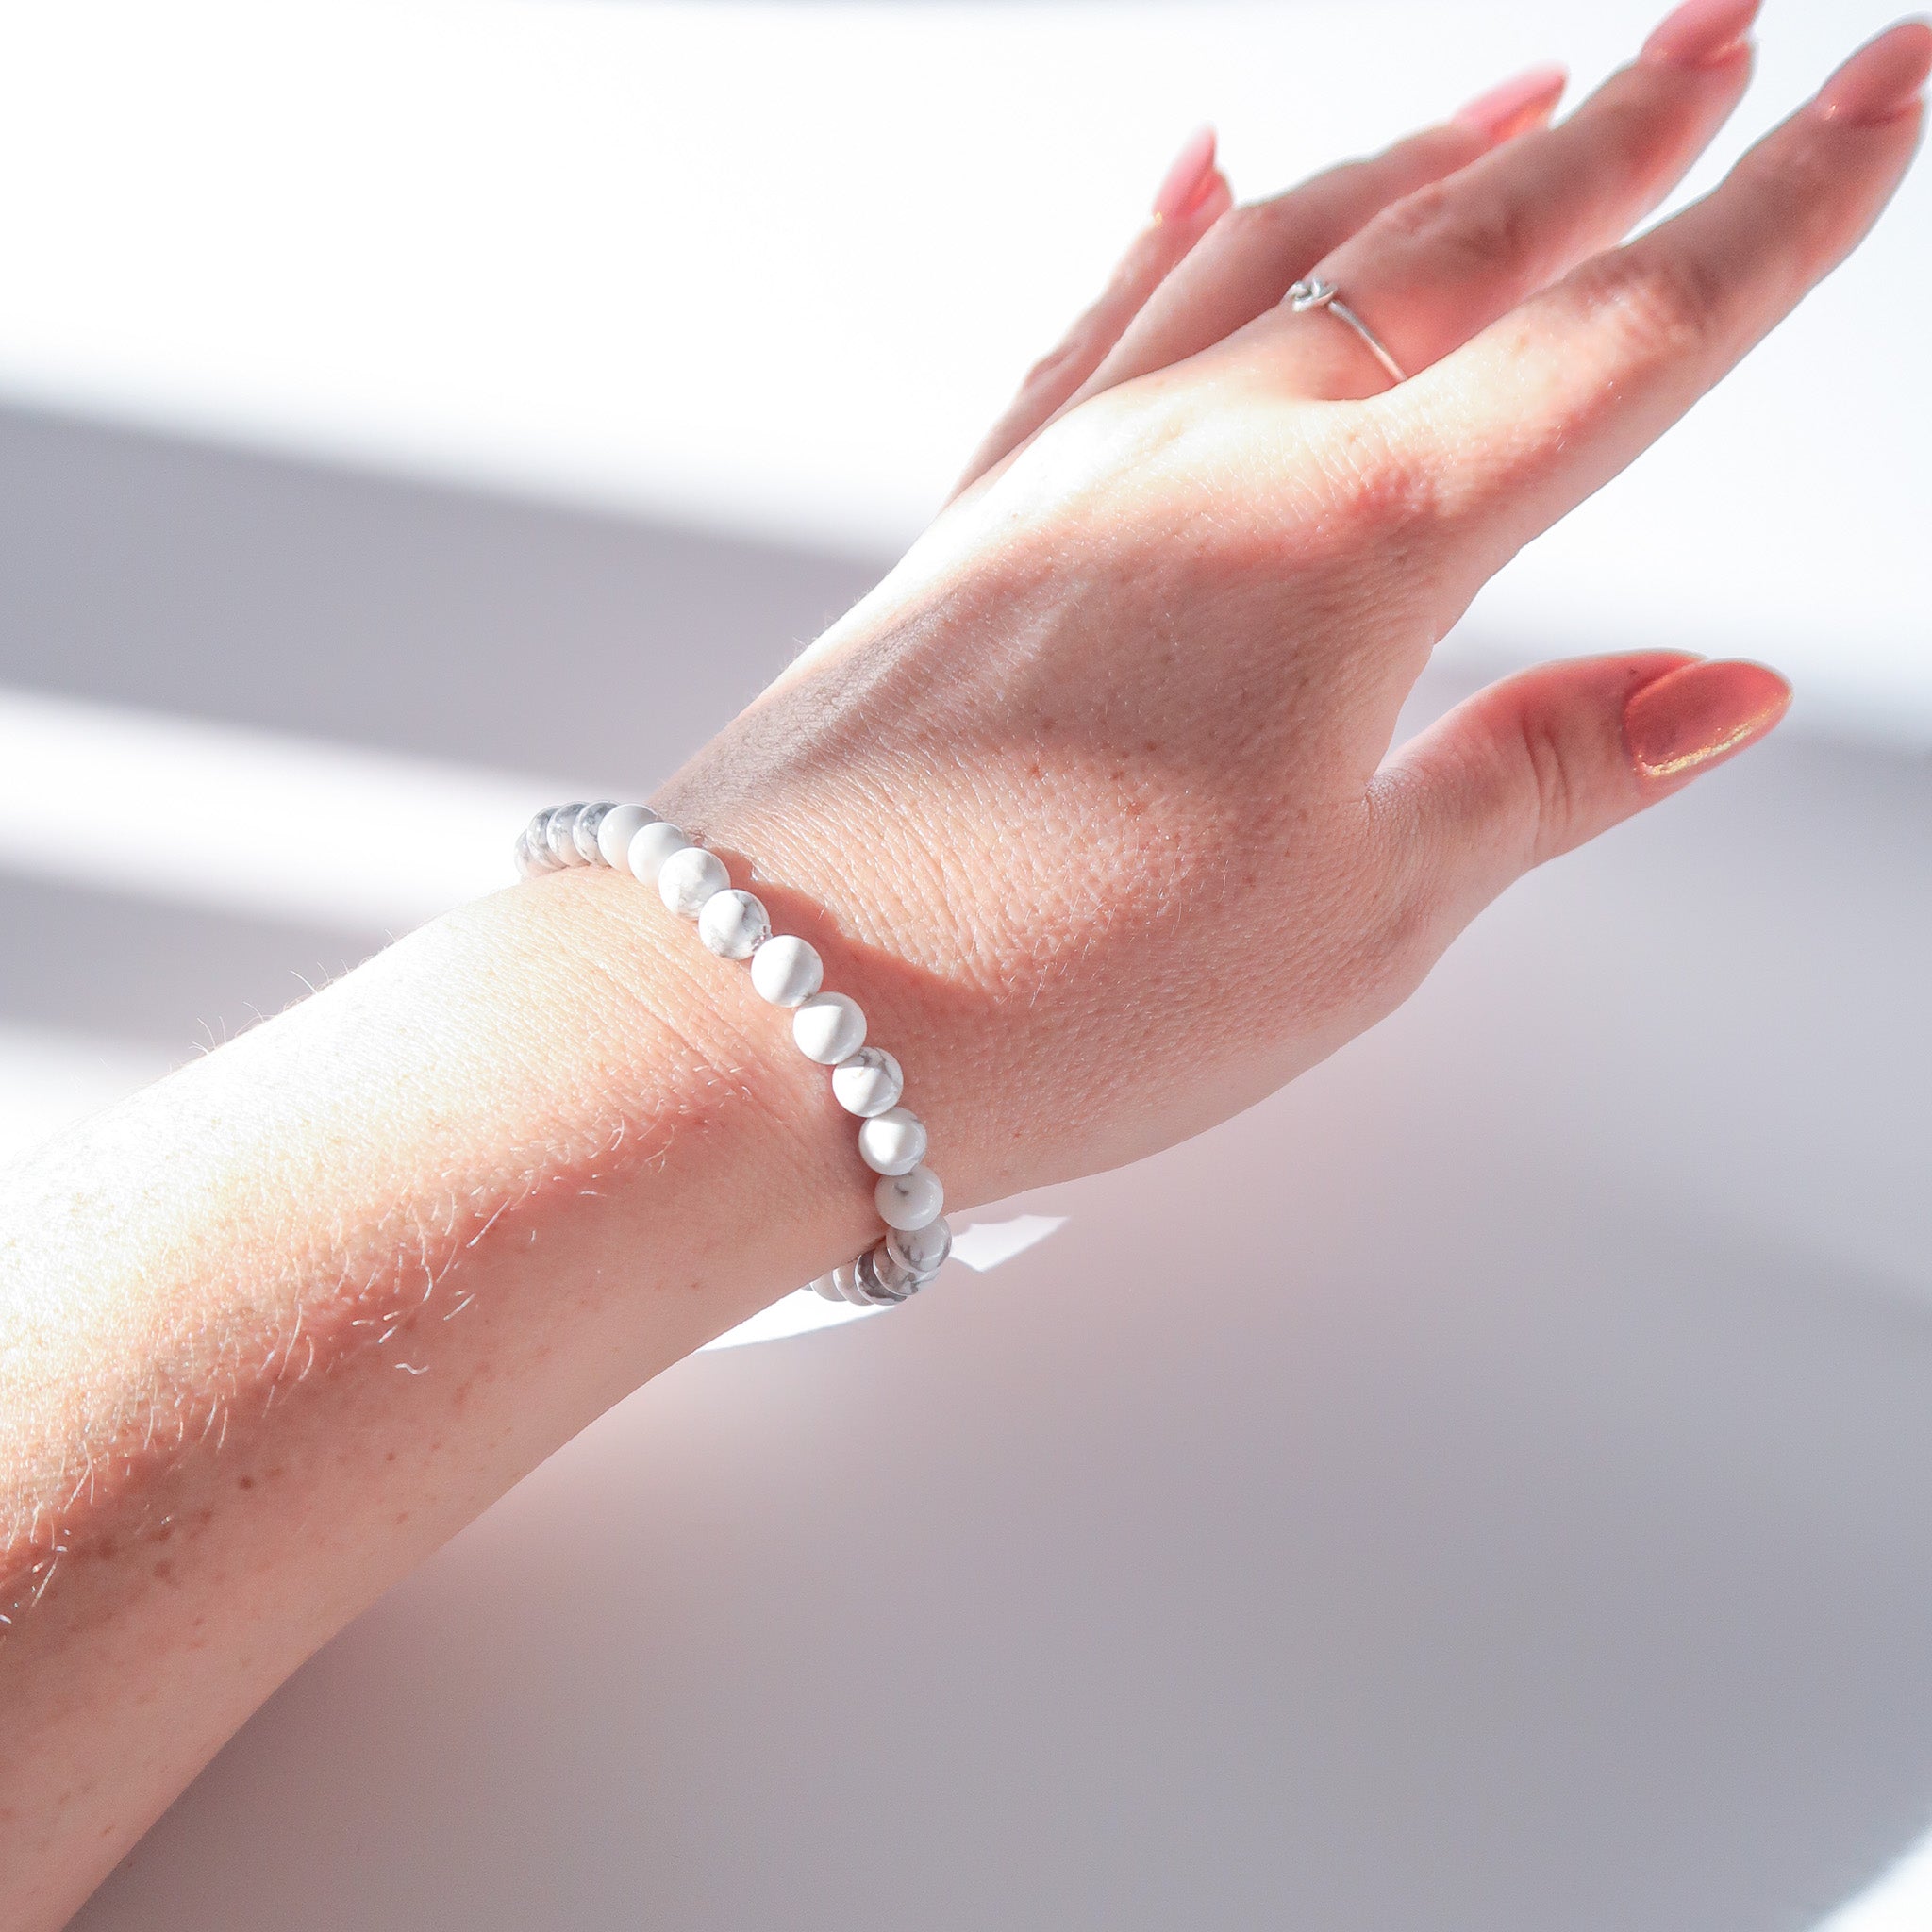 A Polished Howlite Crystal Bracelet being worn on a persons arm